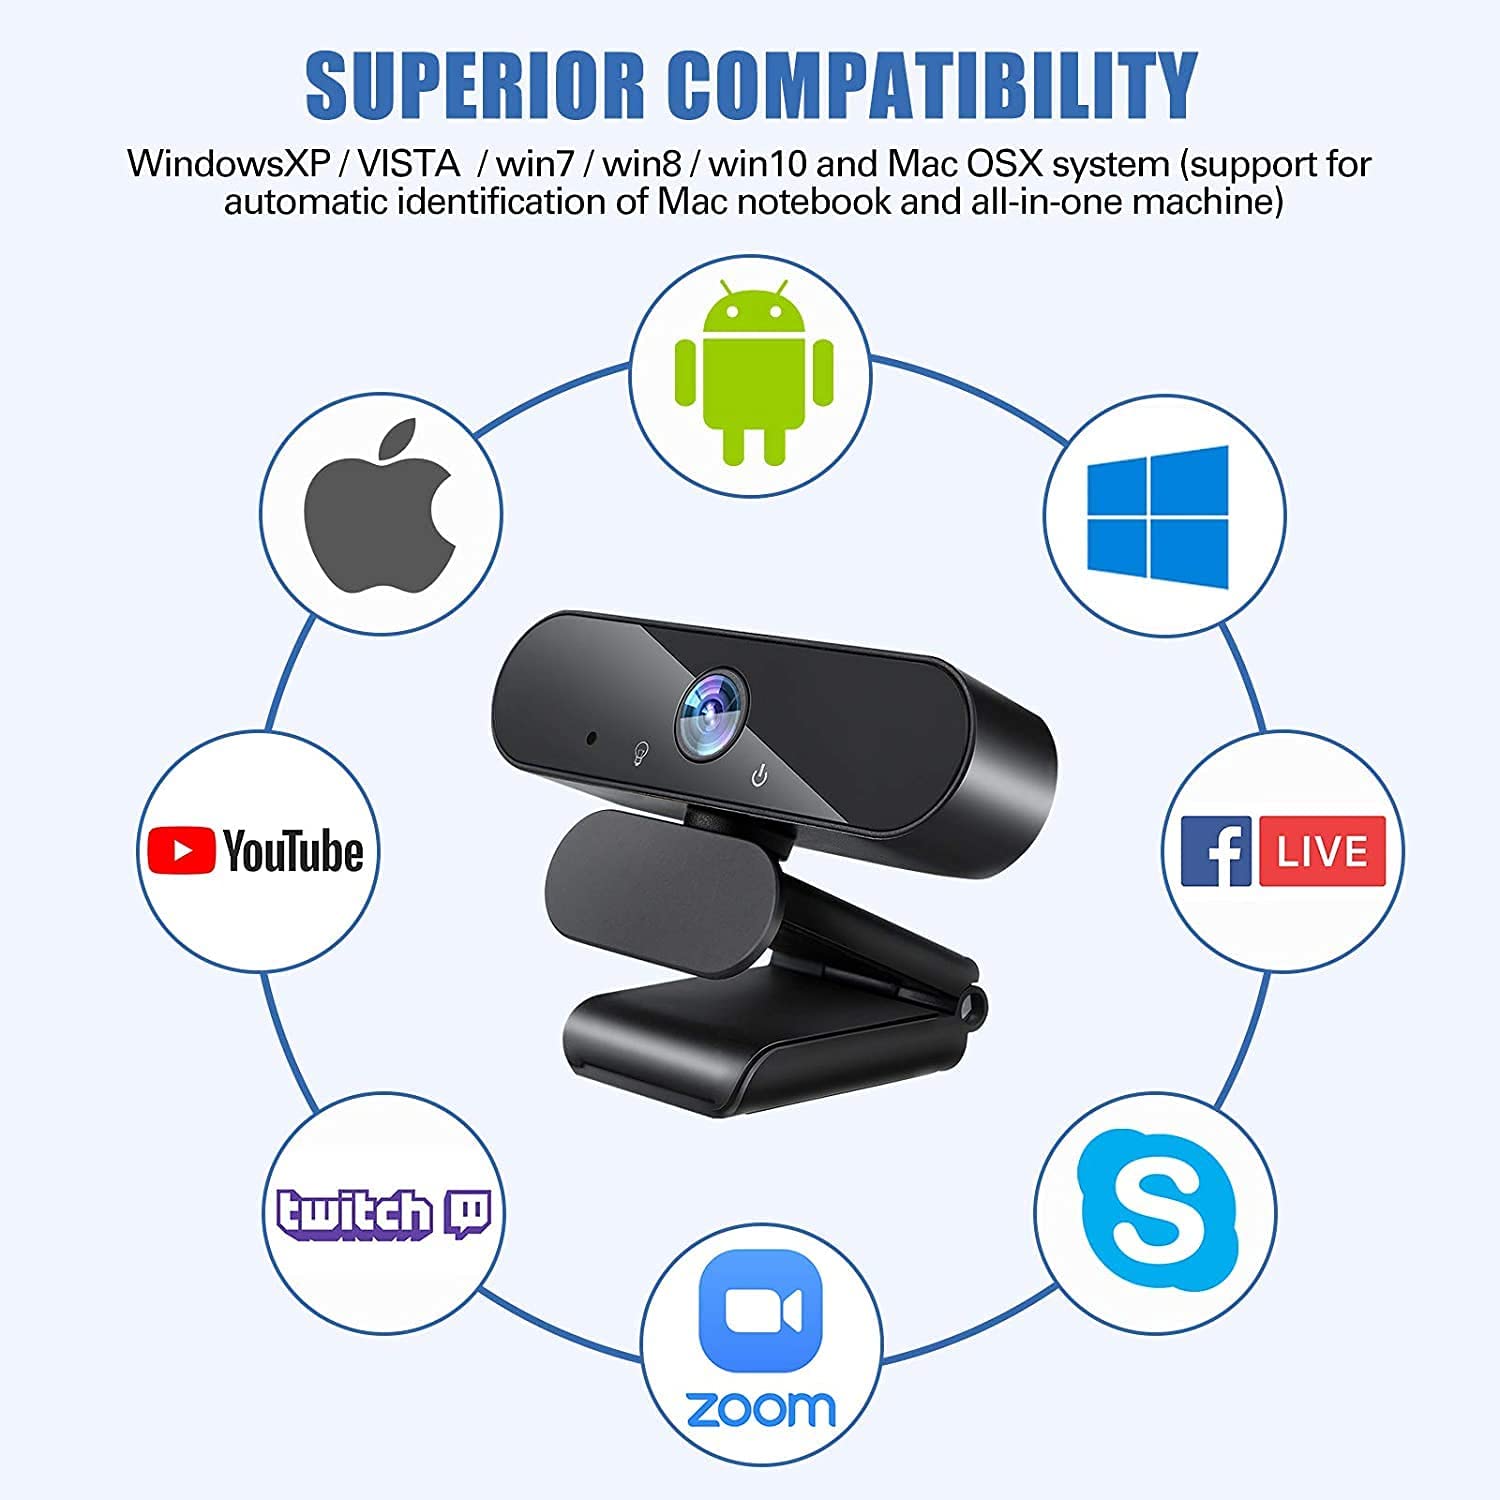 Webcam HD 1080p Web Camera, USB PC Computer Webcam with Microphone, Laptop Desktop Full HD Camera Video Webcam 360 Degree Widescreen, Pro Streaming Webcam for Recording, Calling, Conferencing, Gaming - image 4 of 8